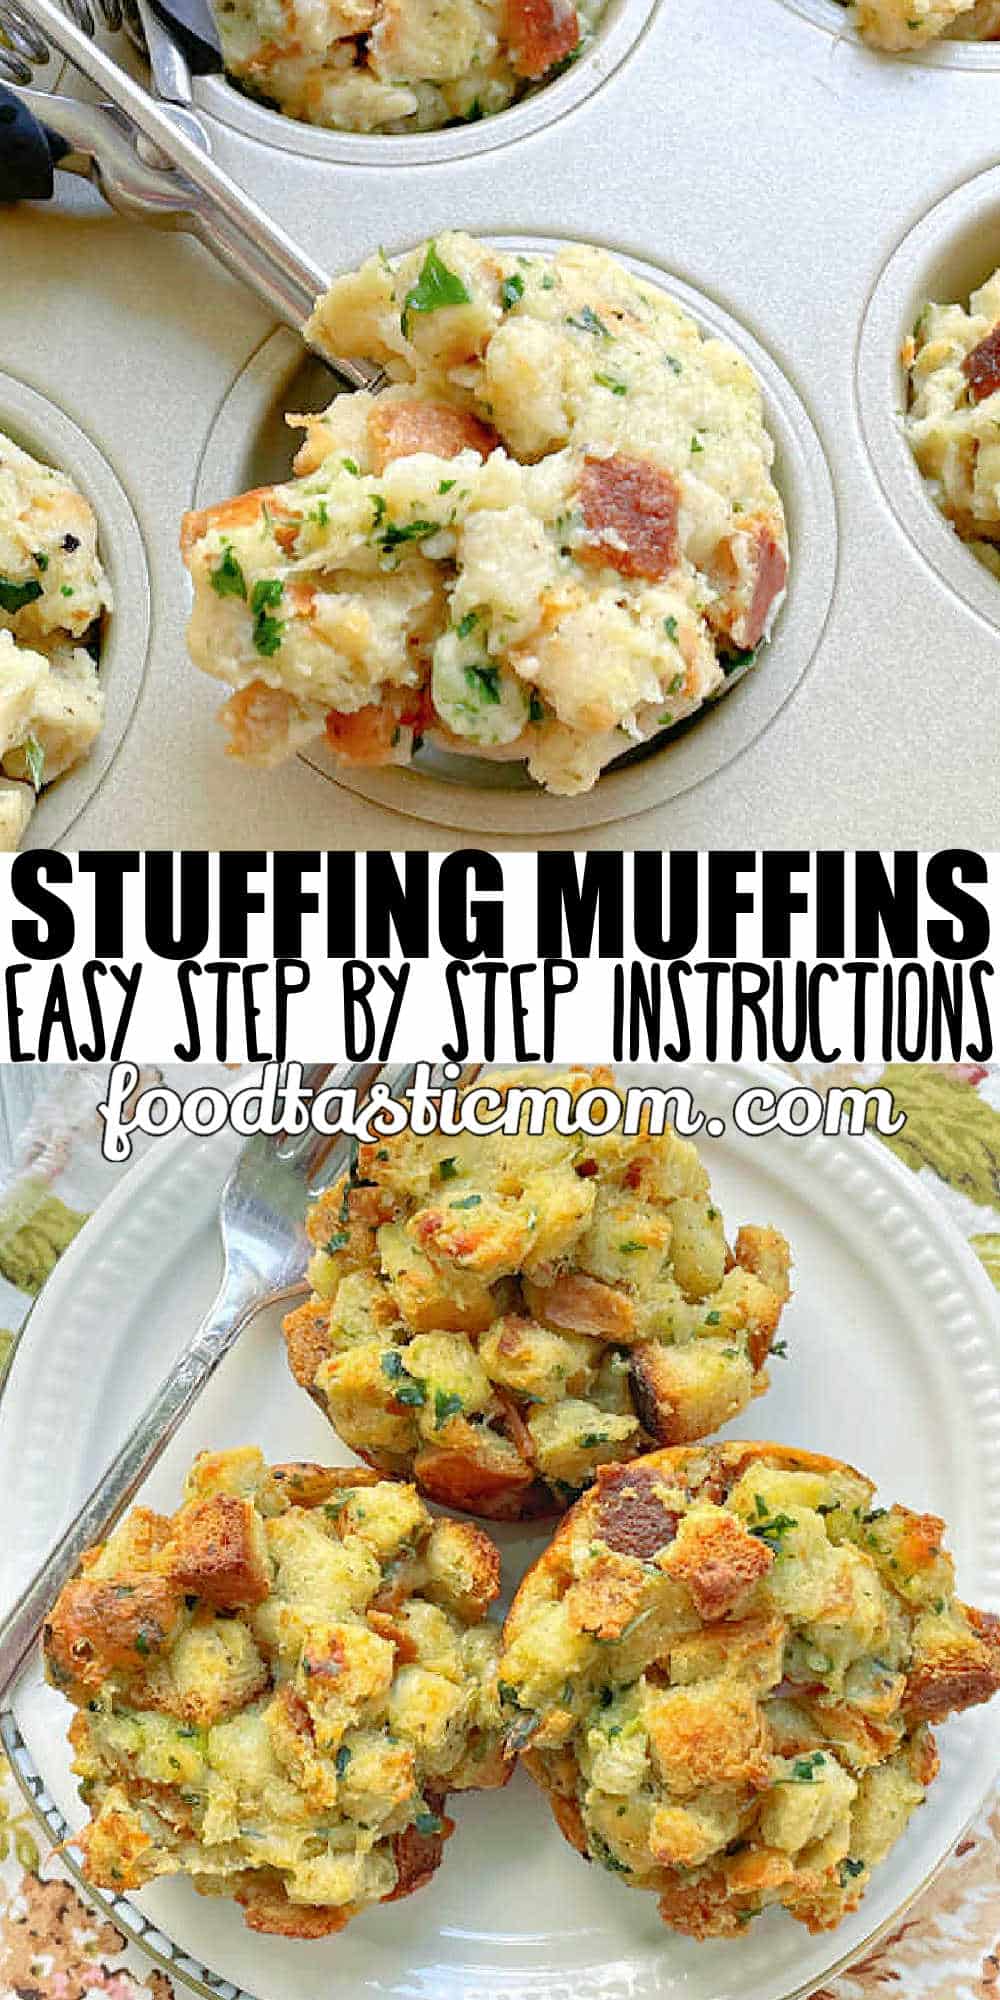 Stuffing muffins are the best way to enjoy Thanksgiving stuffing. Individual portions are simple to prepare and provide more surface area to get crispy. via @foodtasticmom